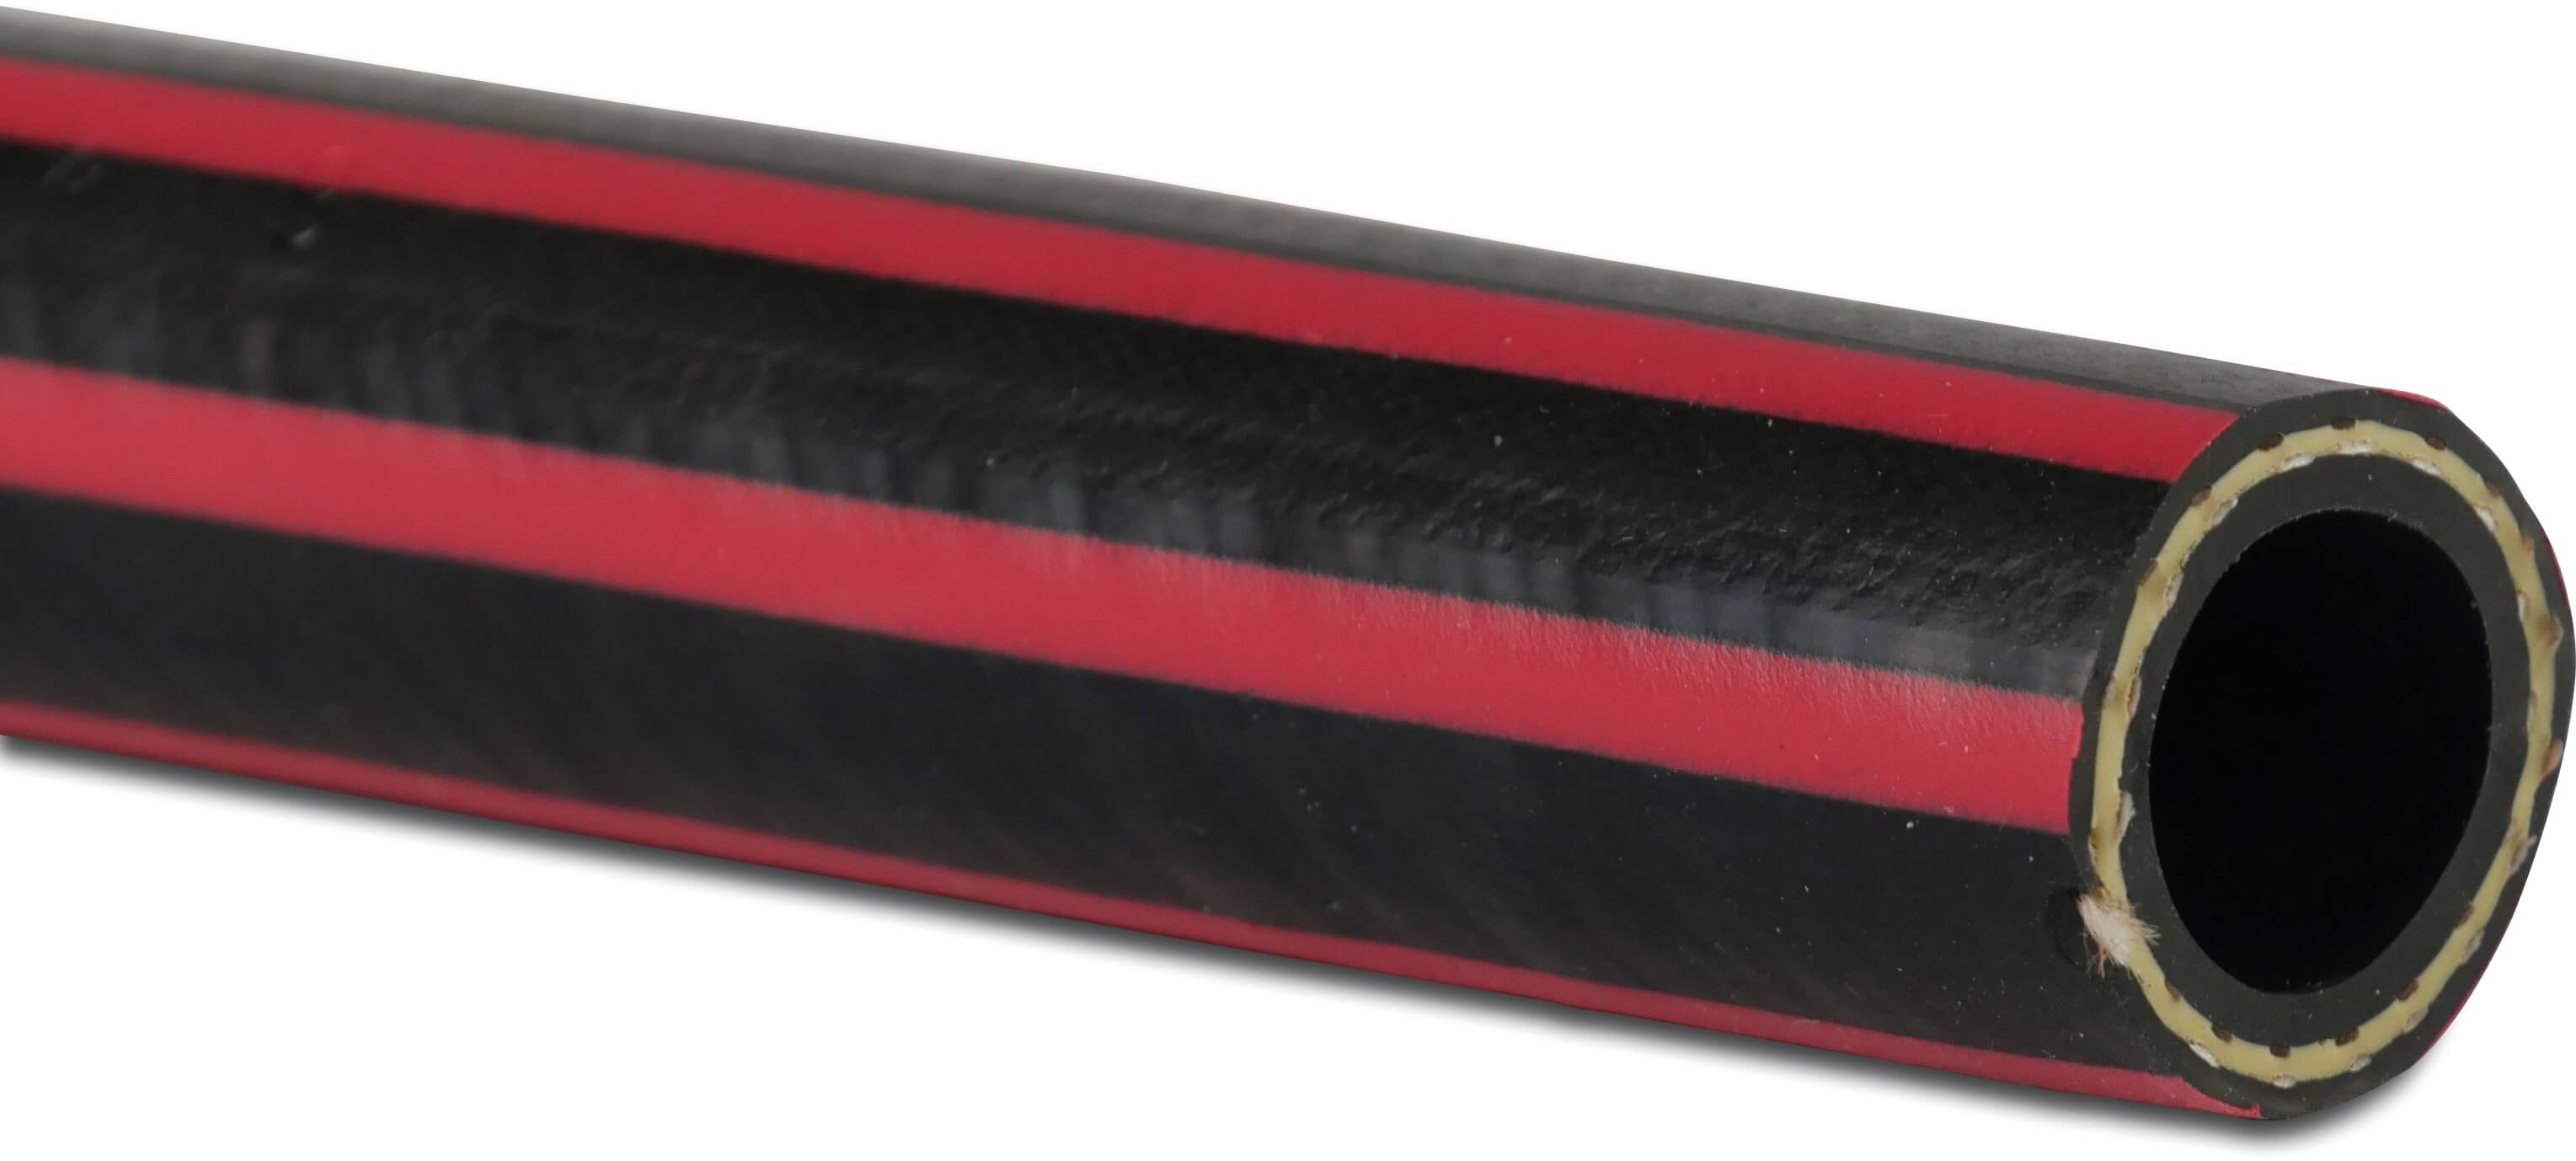 Continental Rubber hose EPDM 13 mm x 19,6 mm x 3,3 mm 20bar black/red 40m type Trix-Rothstrahl